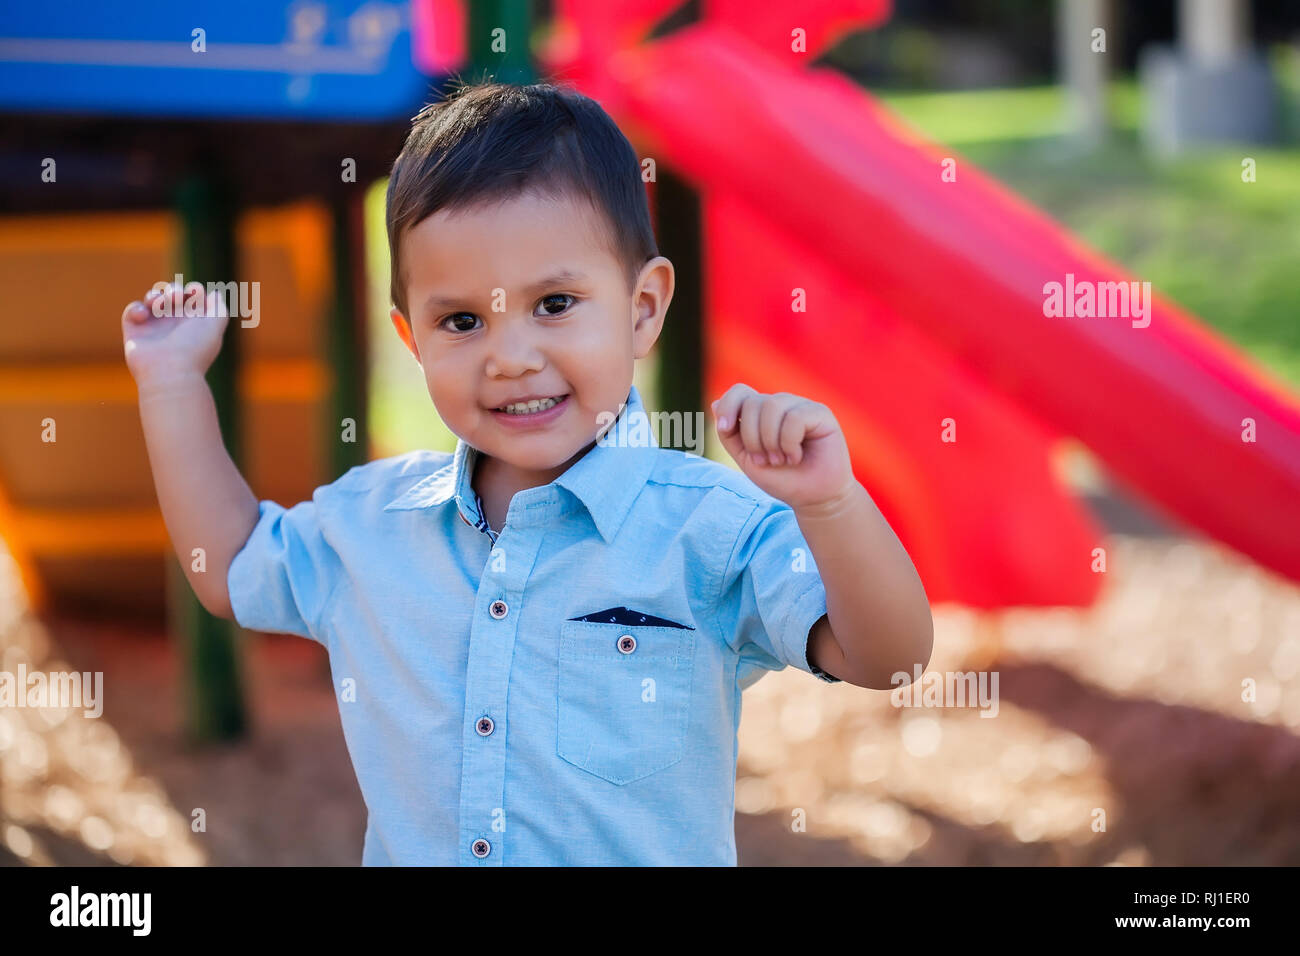 A toddler boy with arms raised up and a smile on his face, playing in a colorful kids playground. Stock Photo